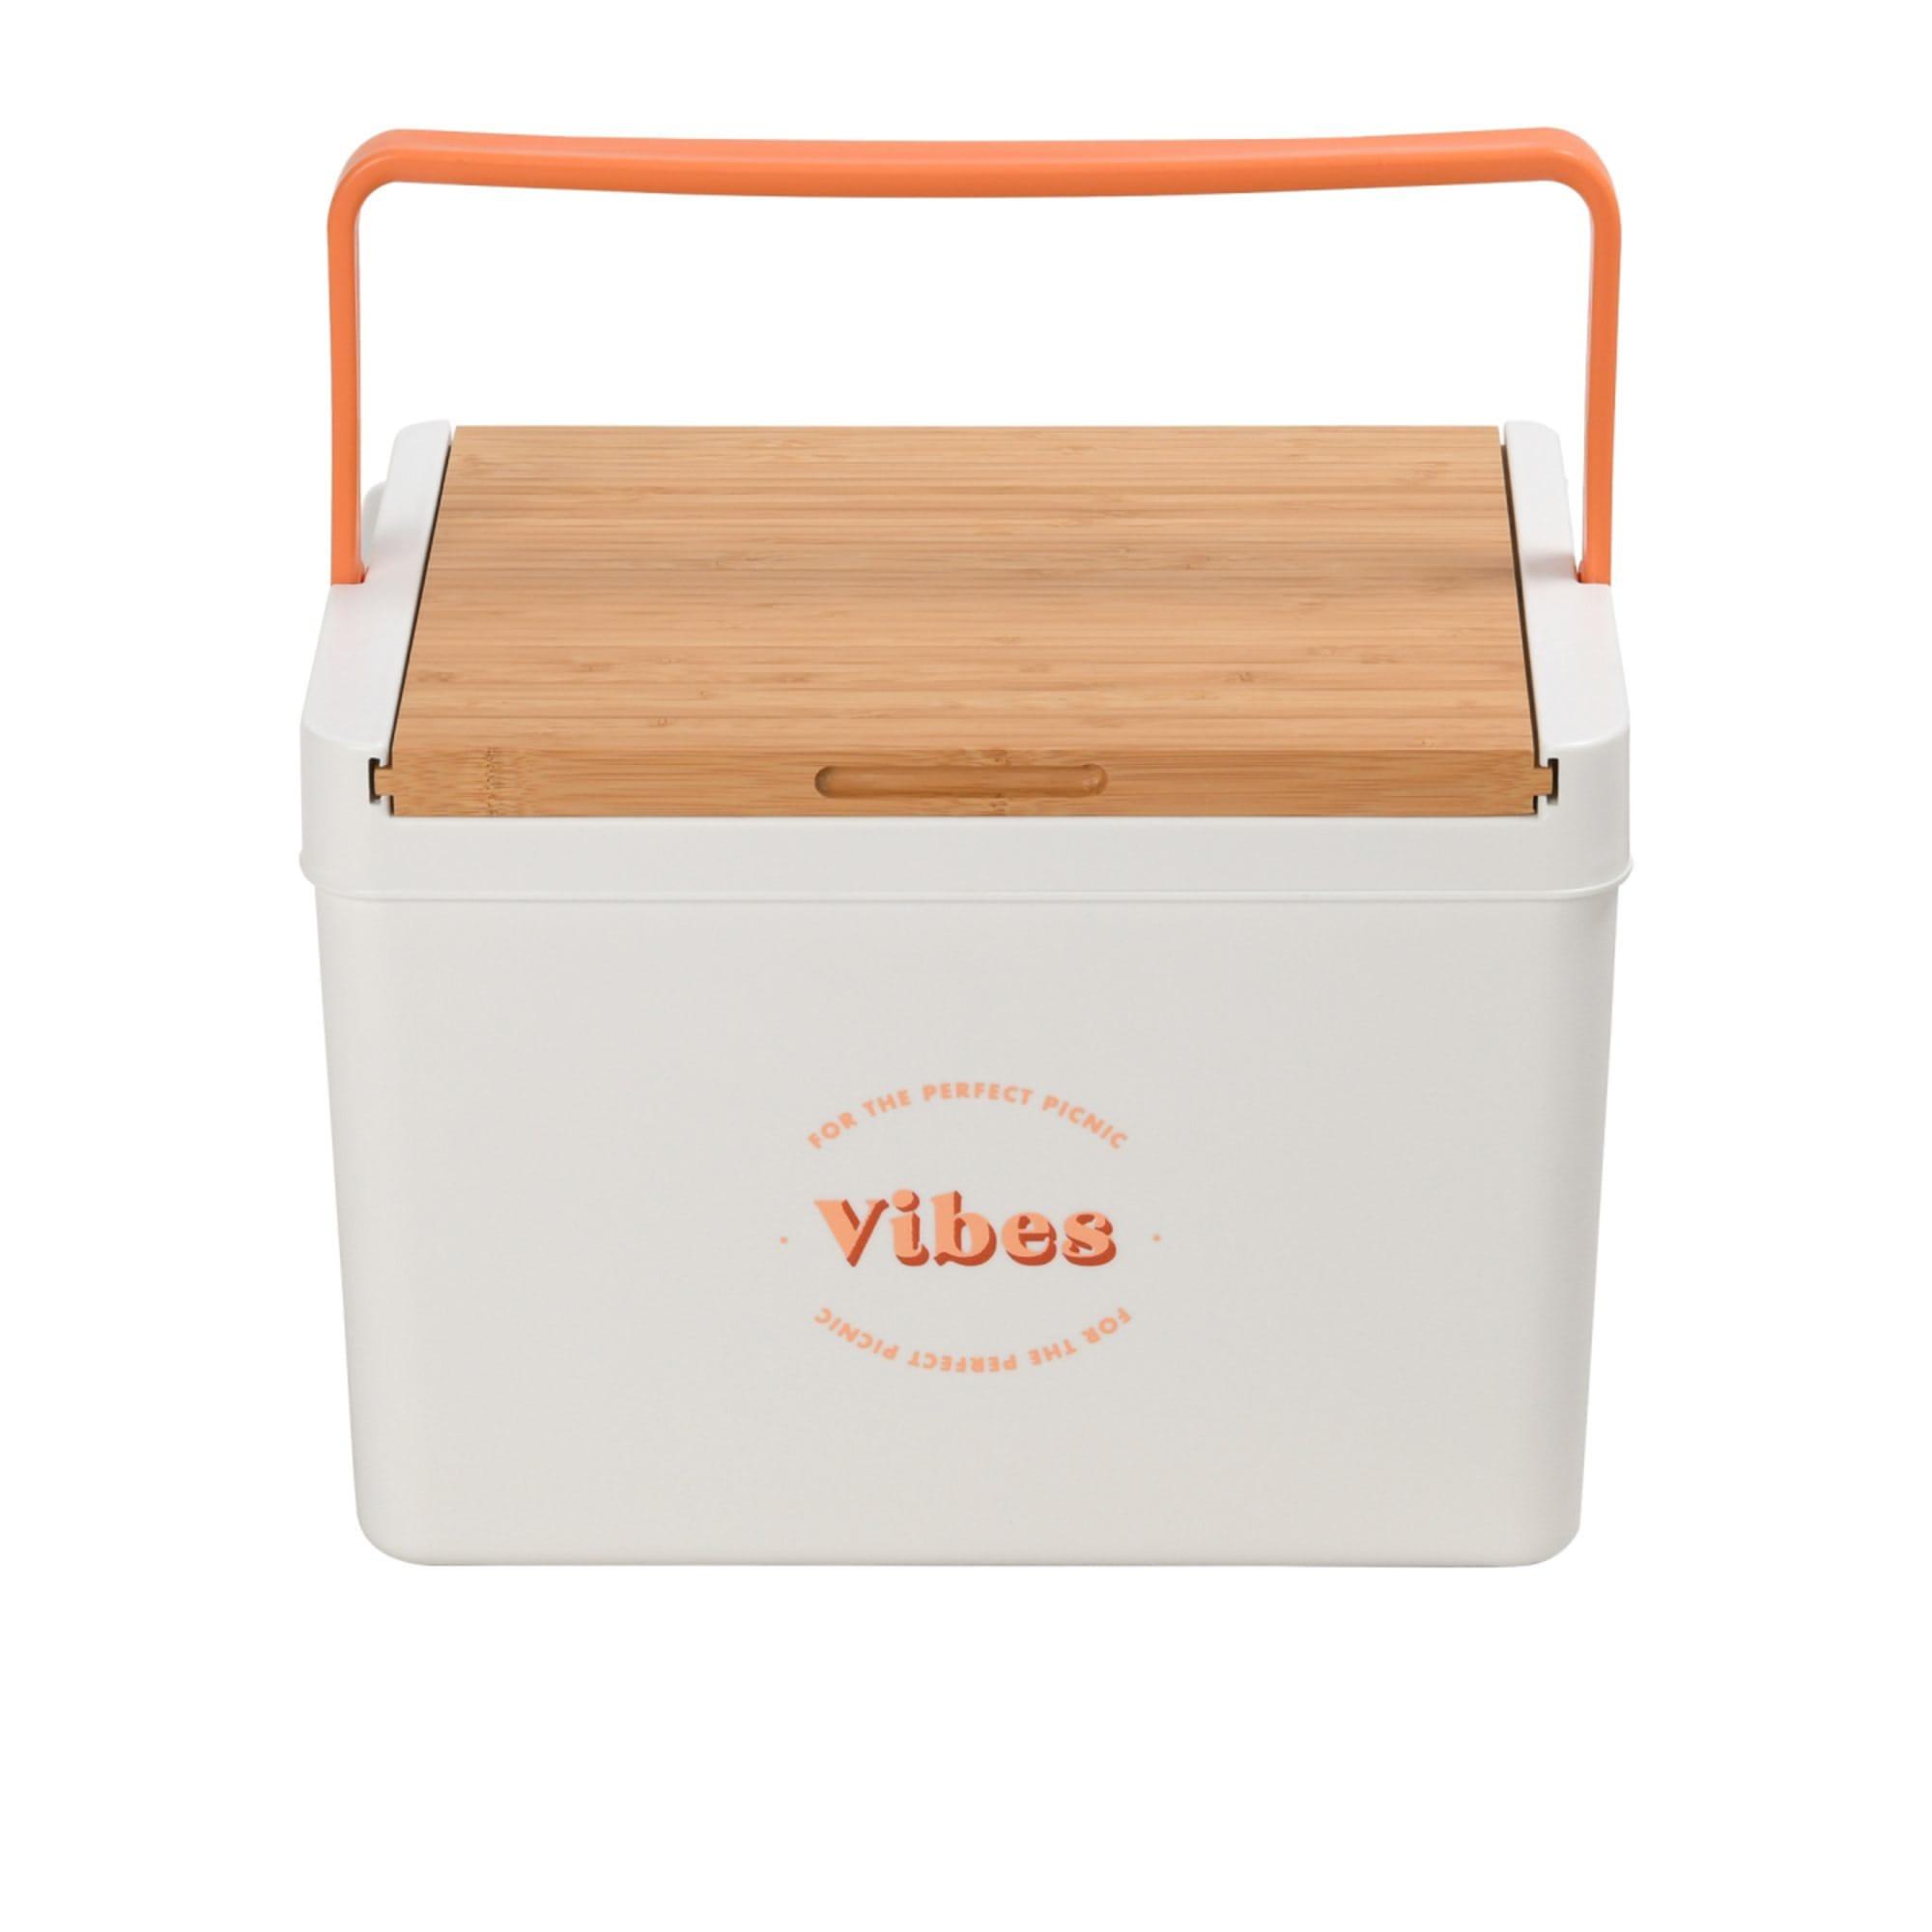 Vibes Portable Cooler Box With Bamboo Lid White Peach Image 1